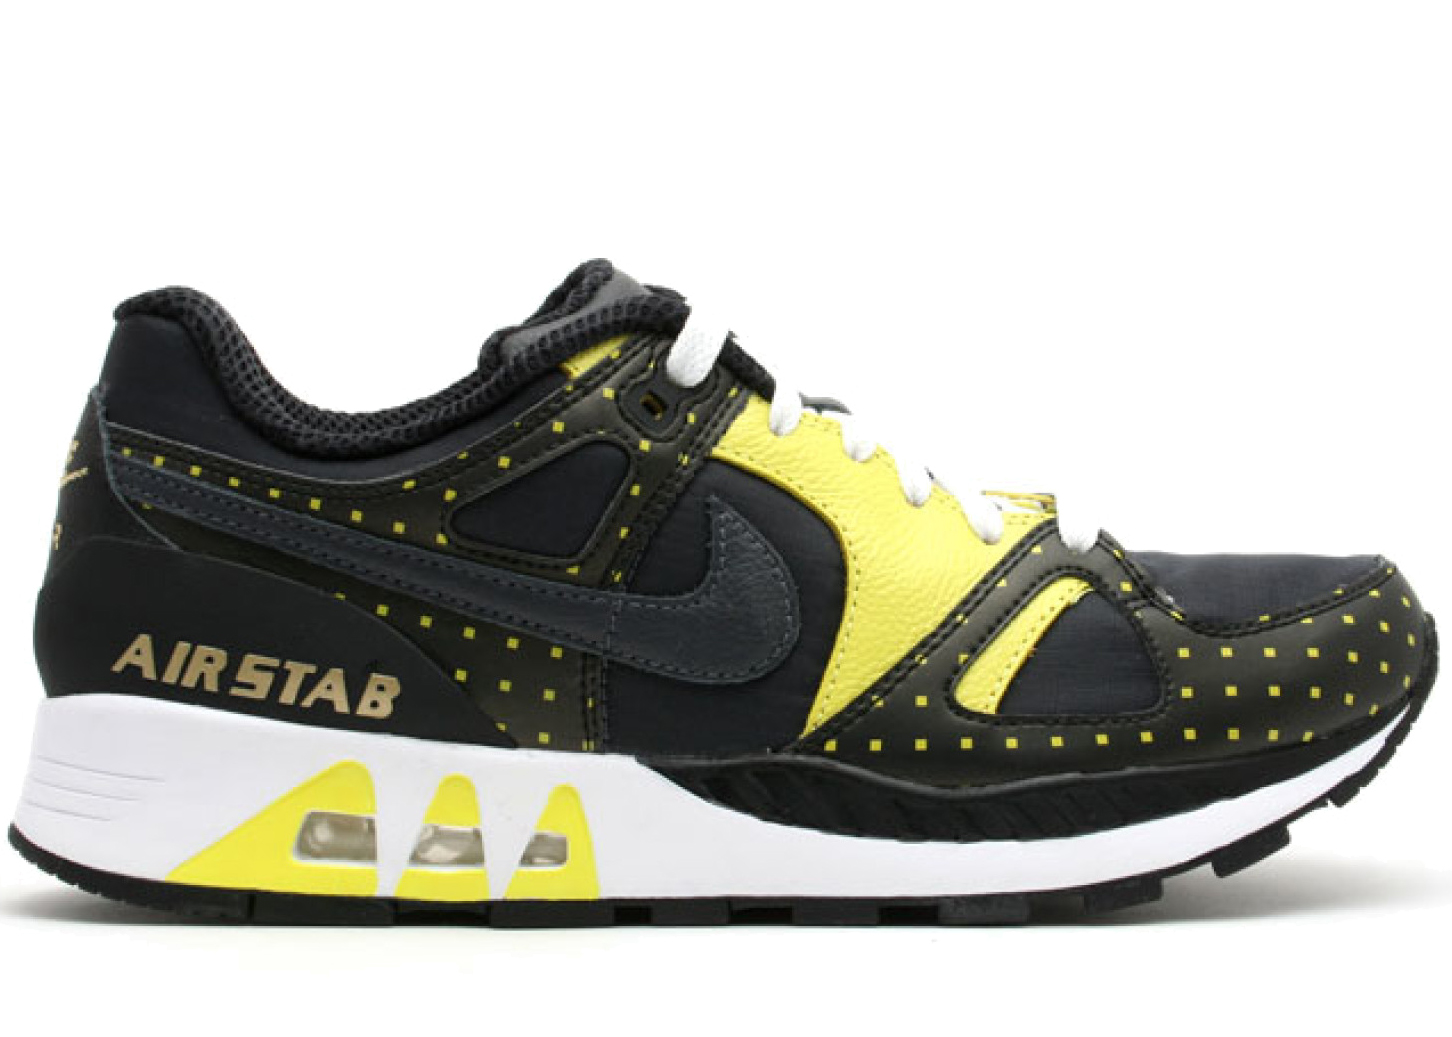 Nike Air Stab Anthracite Voltage Yellow 